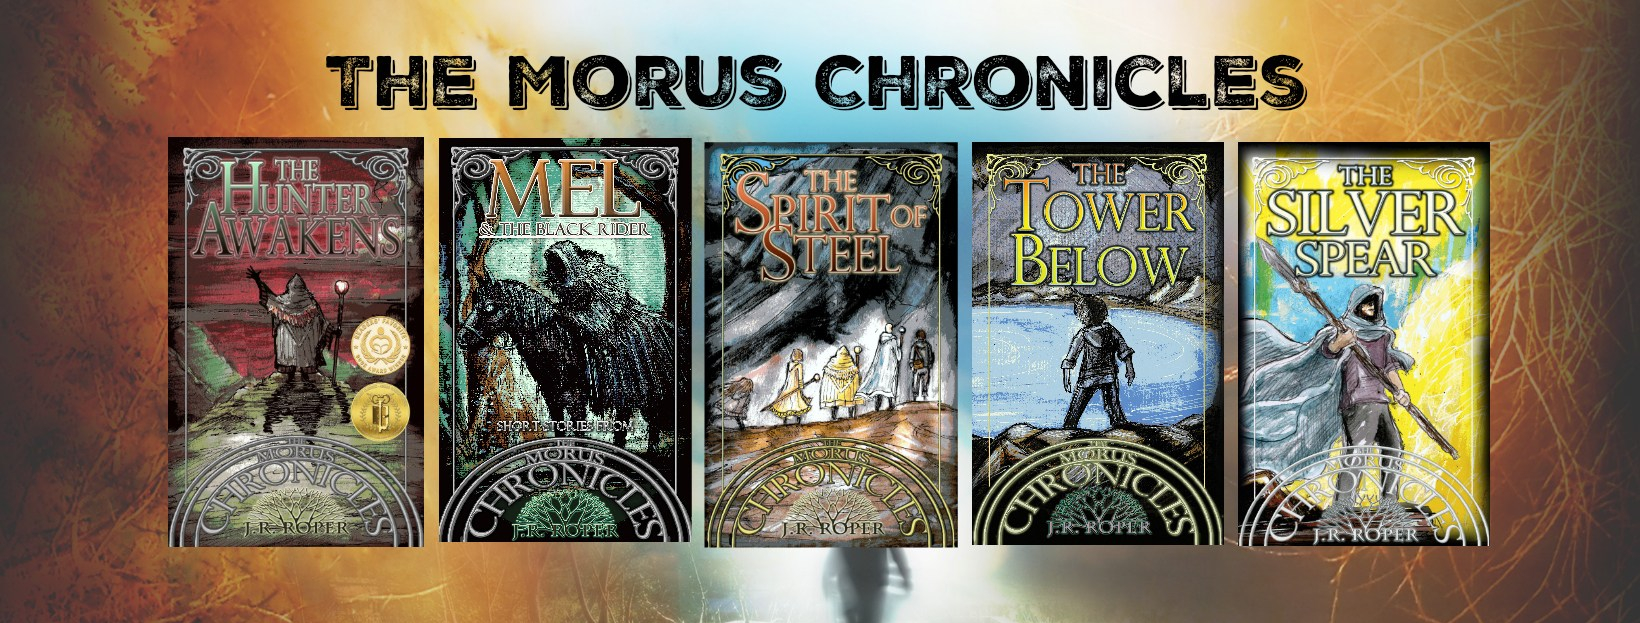 the morus chronicles fb cover